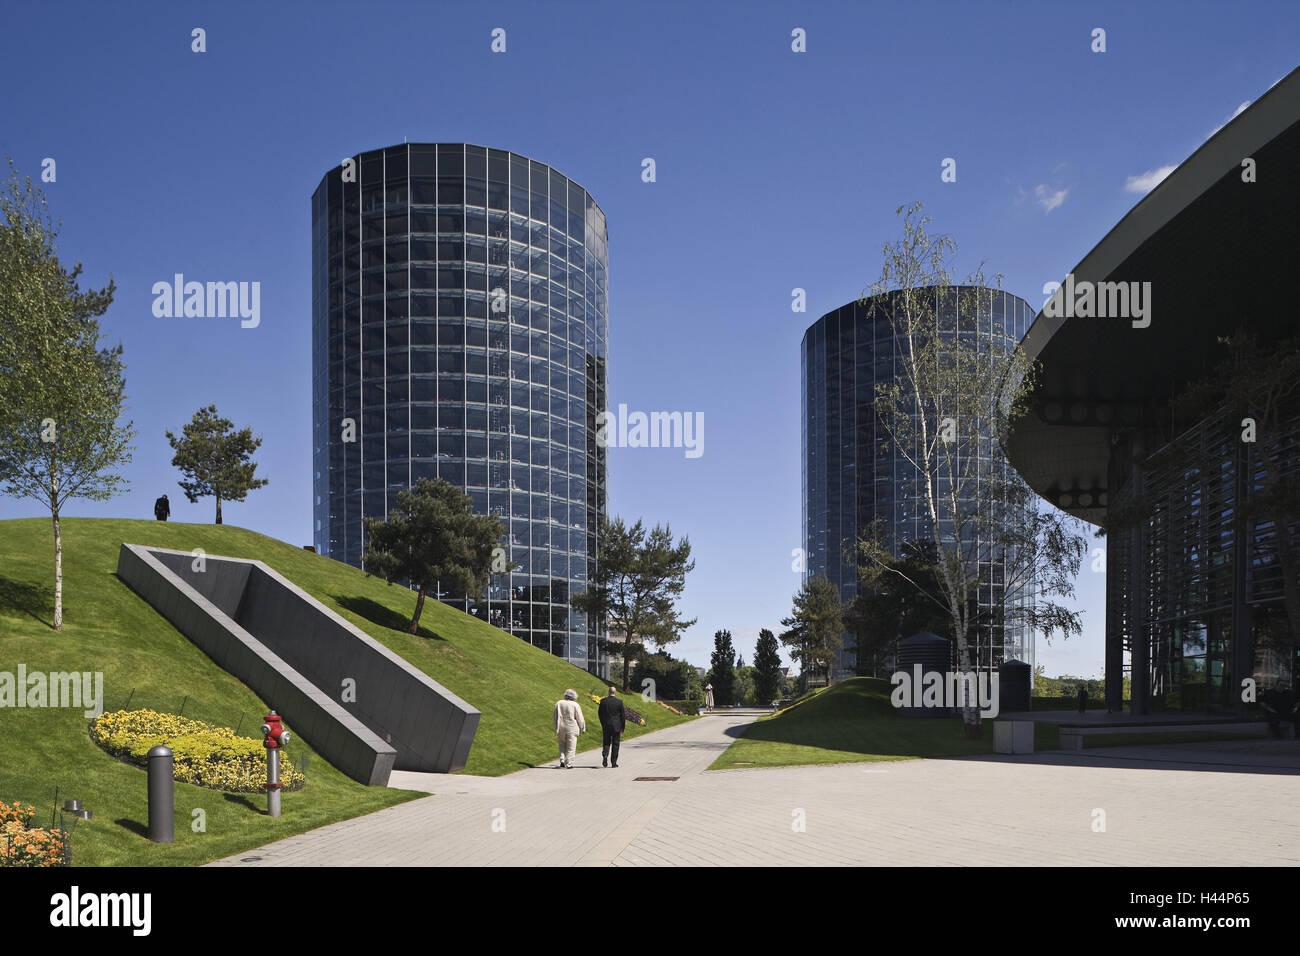 Germany, Lower Saxony, Wolfsburg, autotown, autotowers, town, place of interest, architecture, building, automobile industry, towers, high rises, architecture, park, park, person, tourist, no model release, Stock Photo